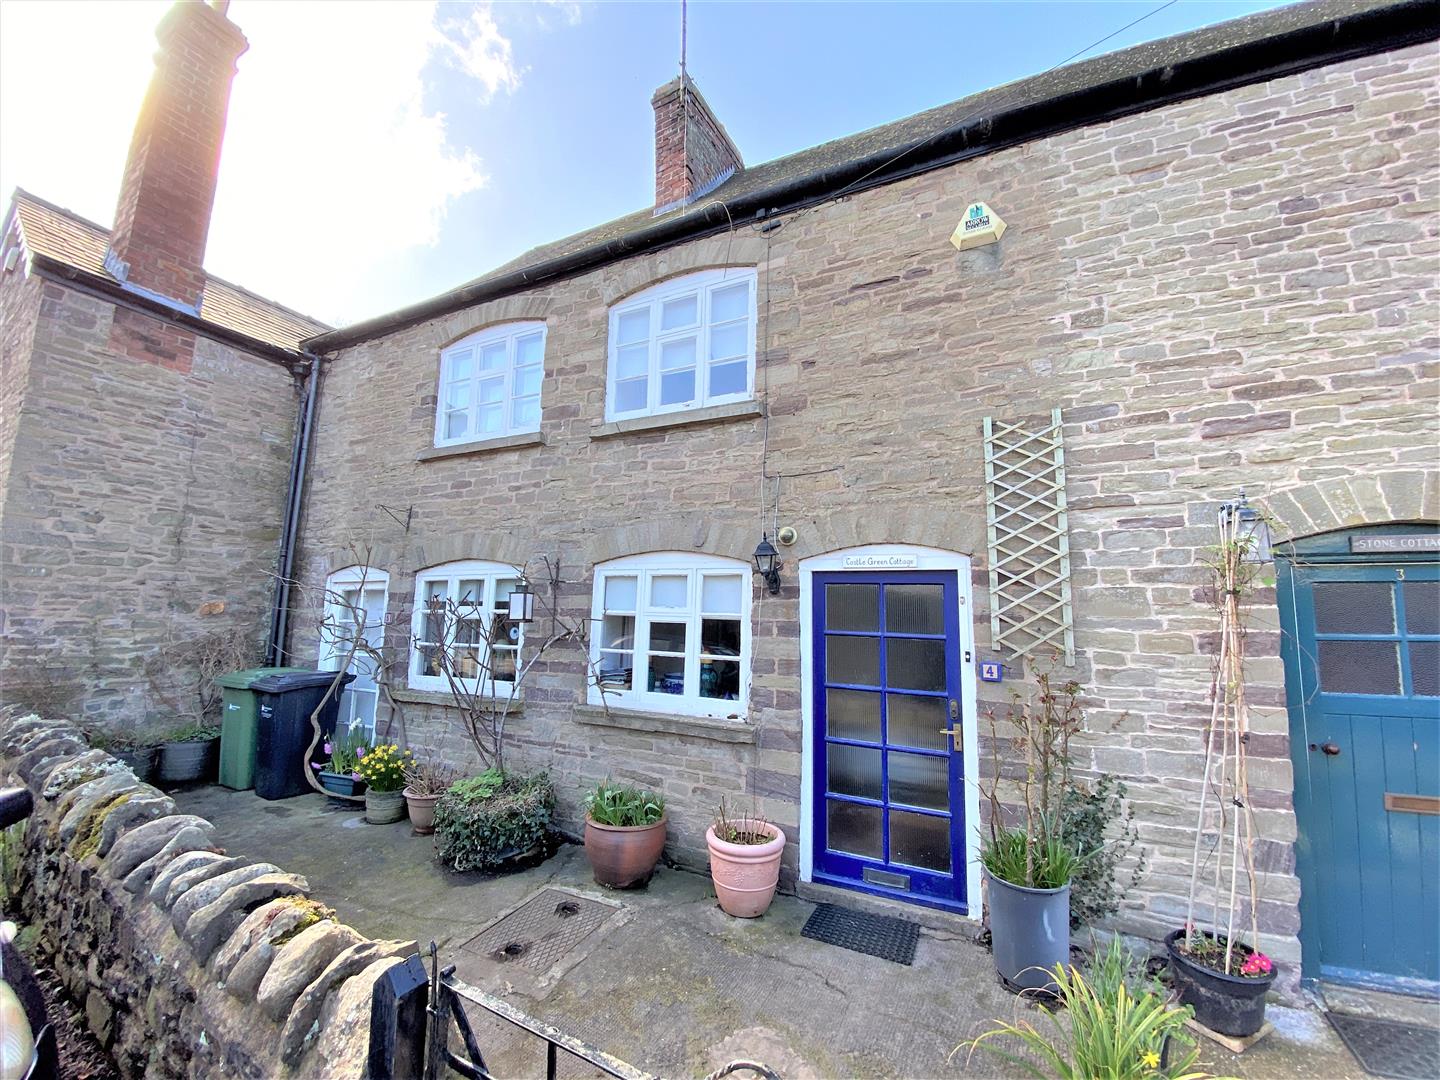 4 bed cottage for sale in Weobley, HR4